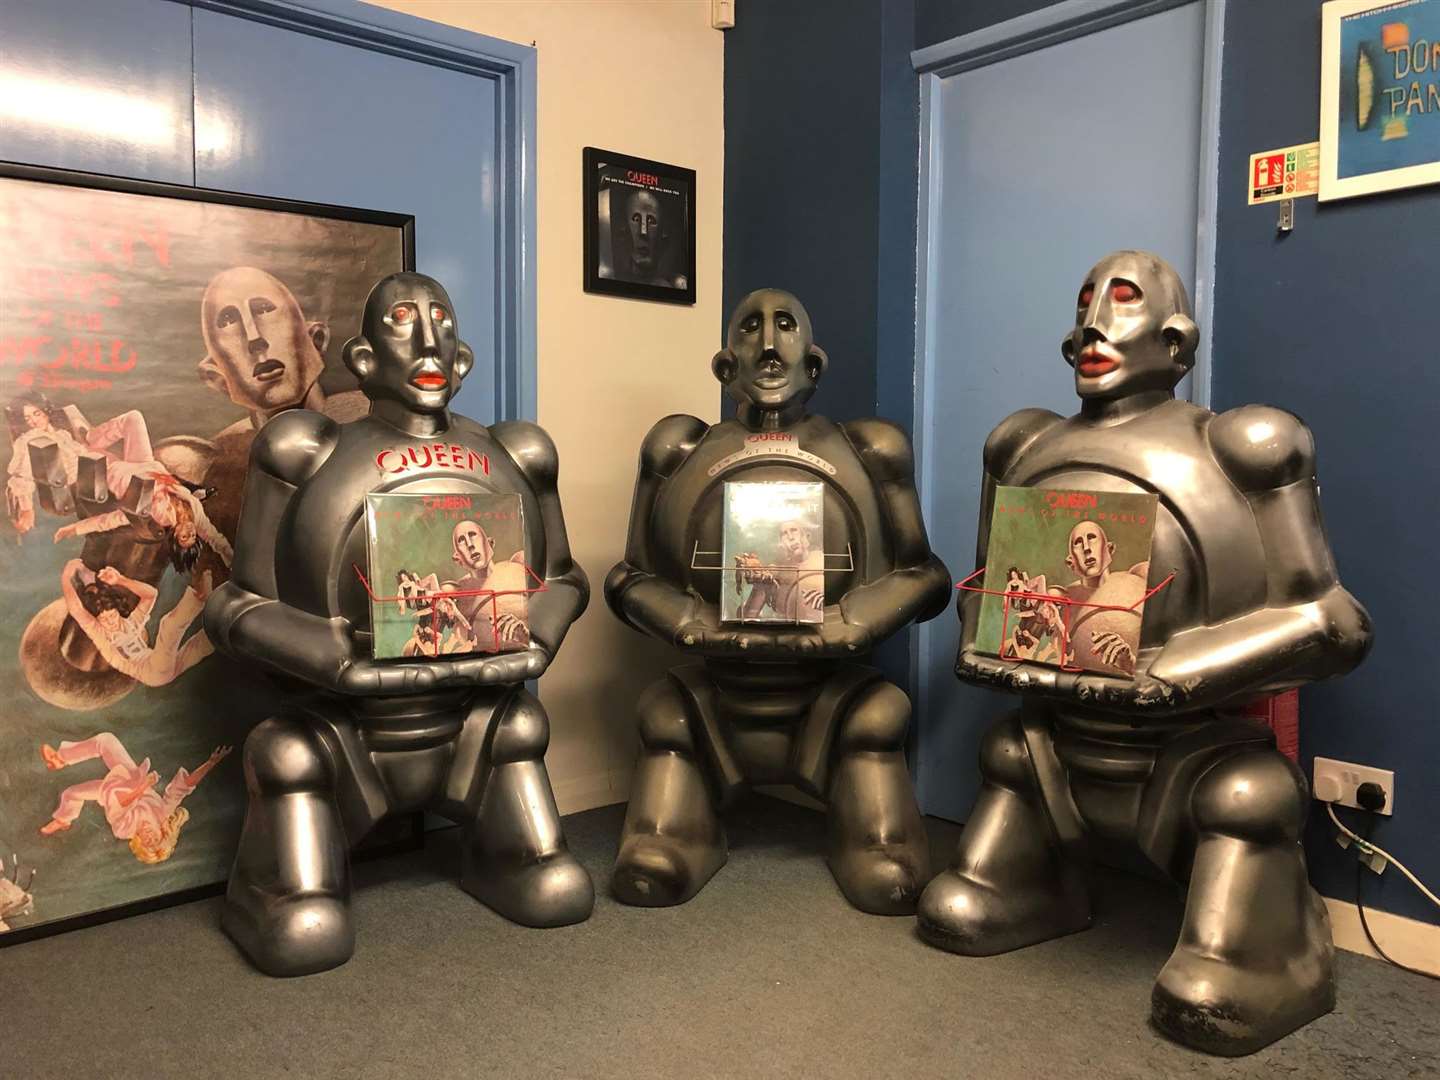 A trio of rare promotional robots for Queen's News Of The World album from 1977. Brian May has one as well. Picture Julian Thomas/EIL.com